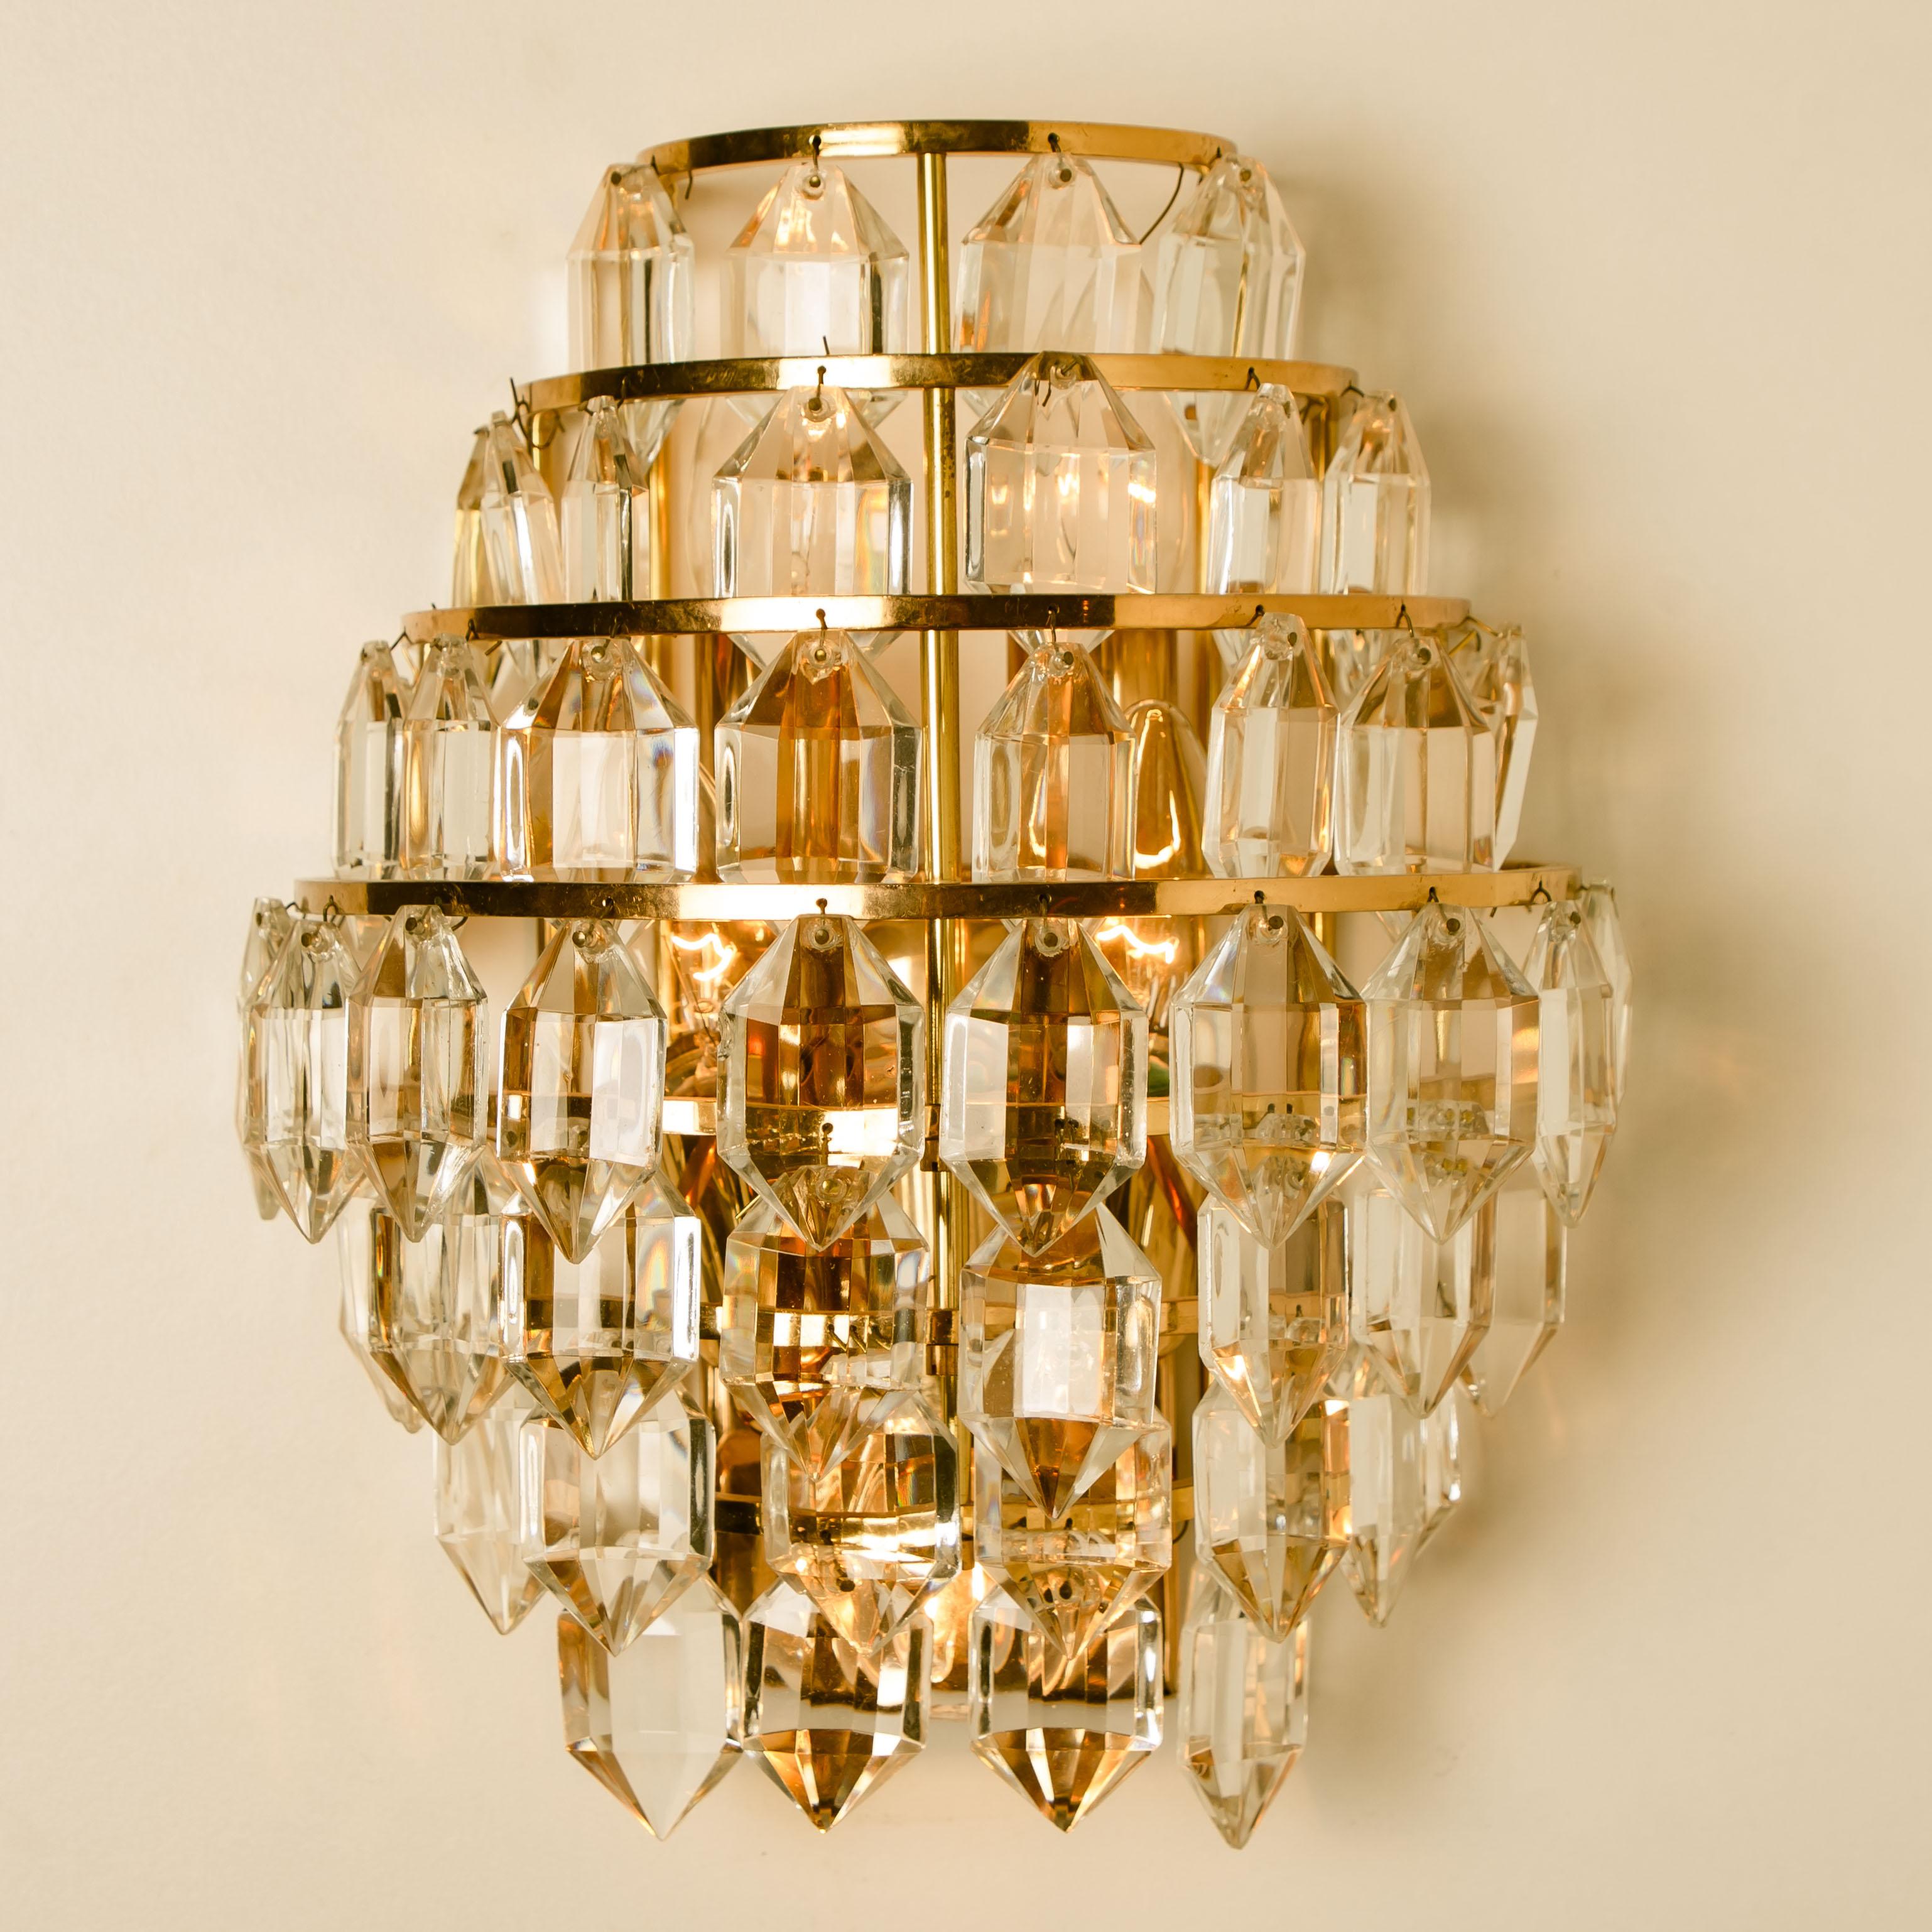 One of the Four Modern Crystal Glass Wall Sconces by Bakalowits, 1960s For Sale 6